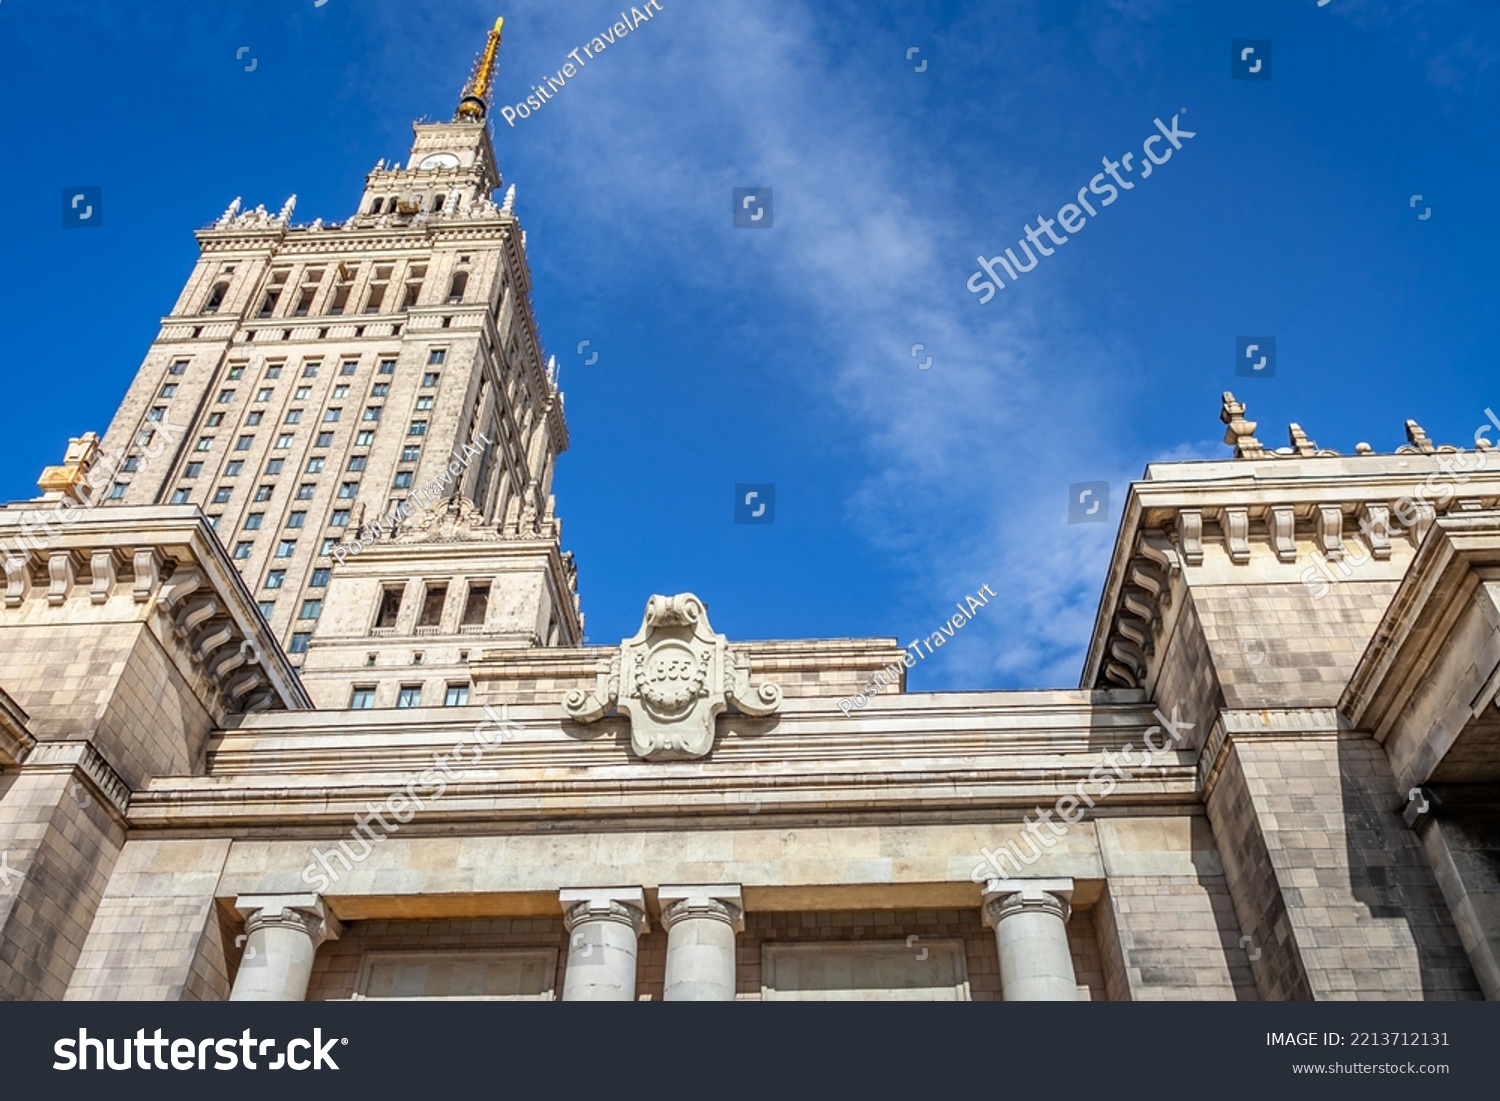 Palace of culture and science, Warsaw, Poland #2213712131